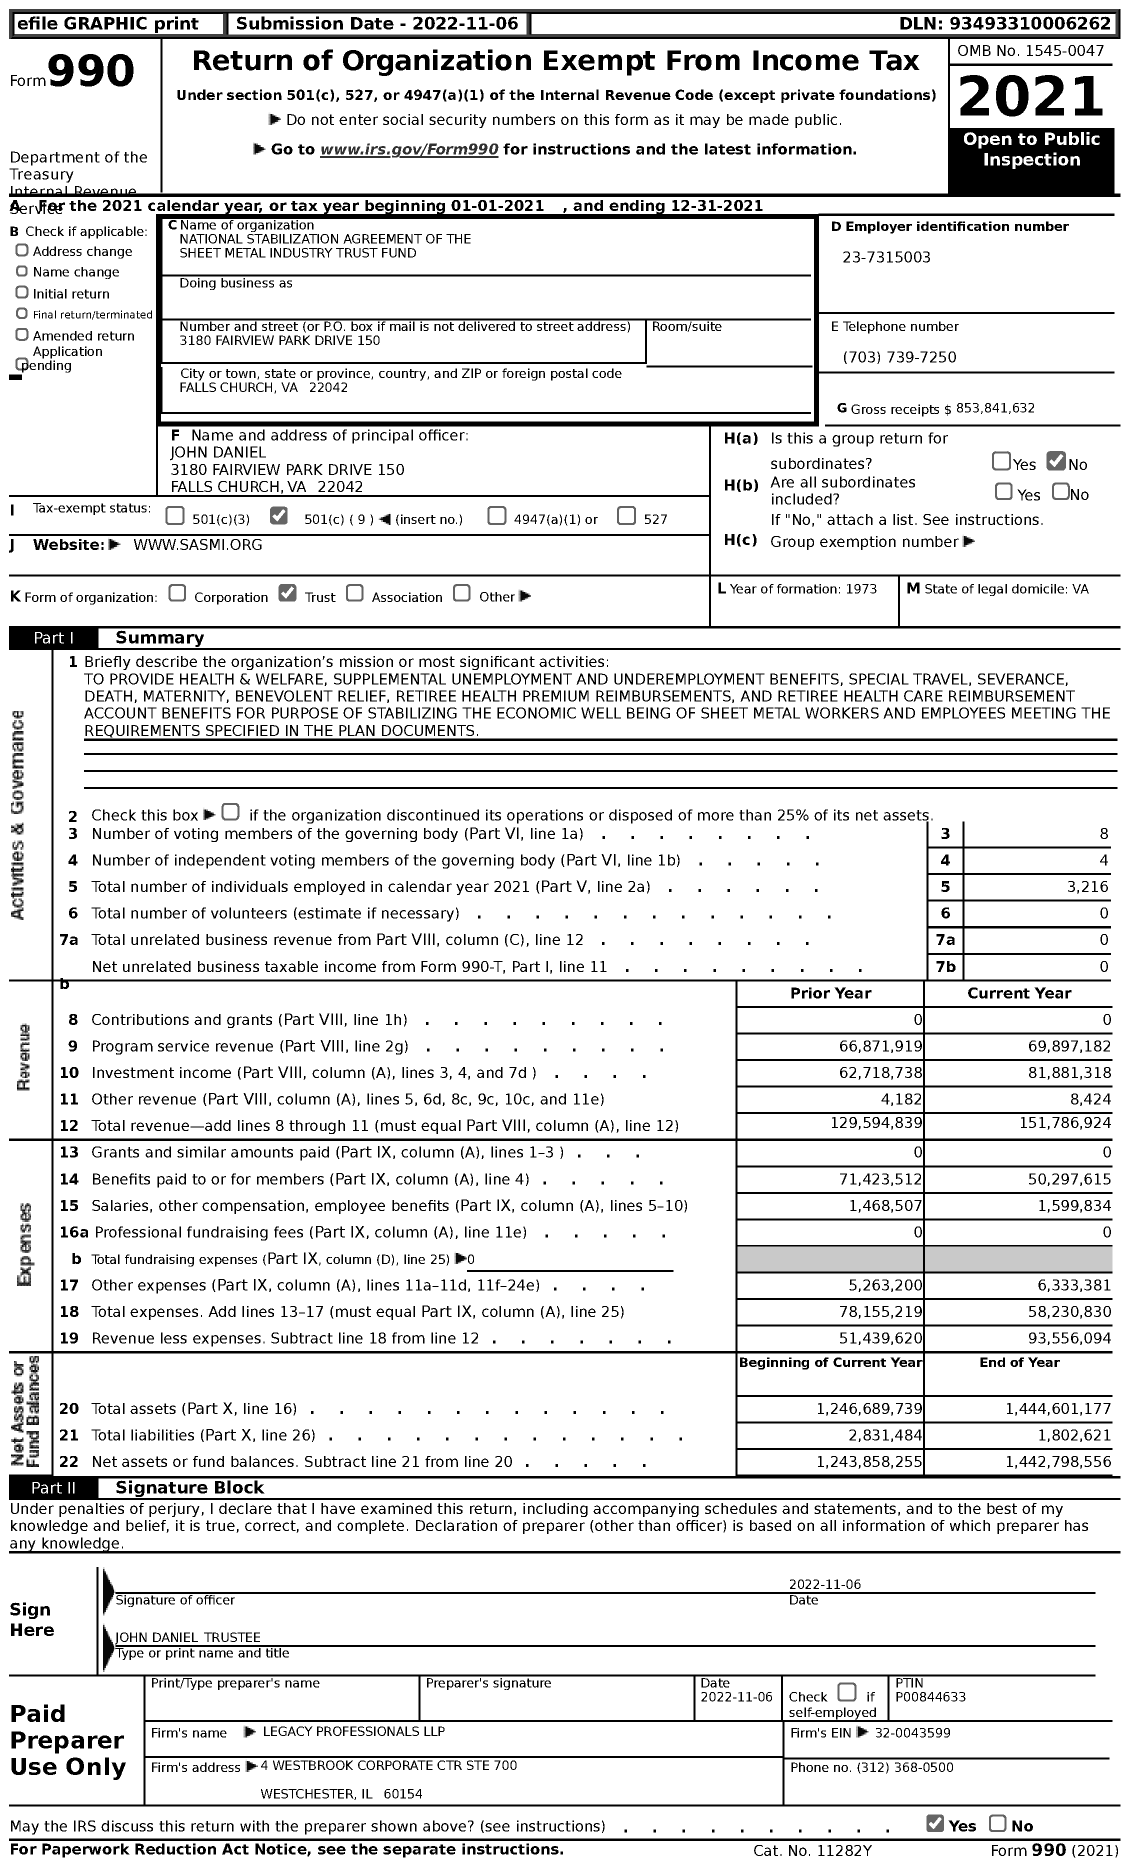 Image of first page of 2021 Form 990 for National Stabilization AGREEMENT OF The Sheet Metal Industry Trust FUND